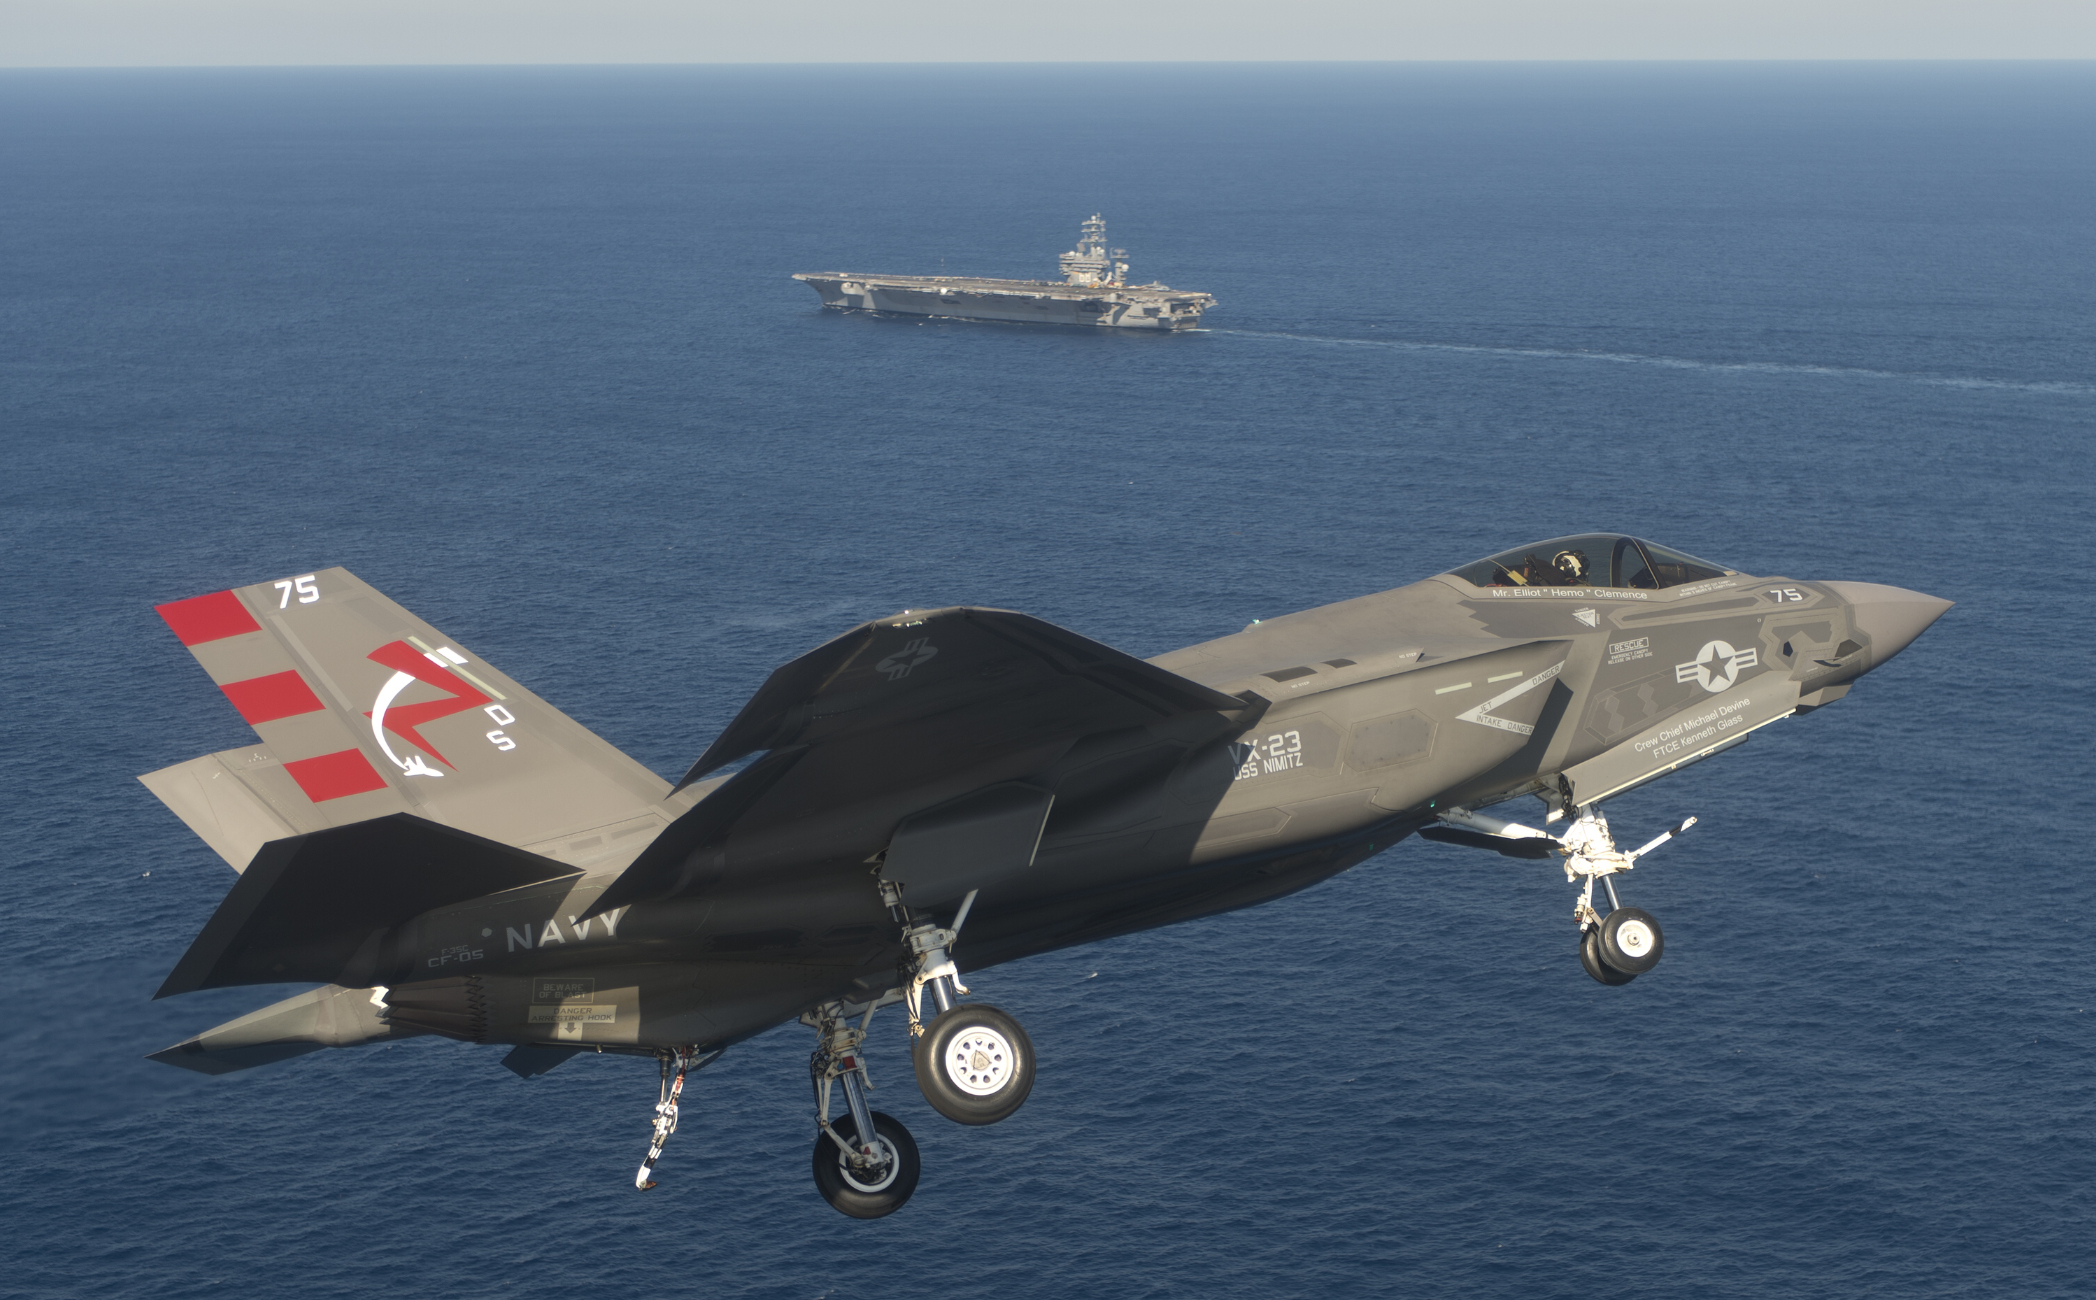 An F-35C Lightning II Joint Strike Fighter on Nov. 3, 2014. The Navy included eight of the aircraft and 12 Boeing F/A-18E/F Super Hornets in its FY 2016 Unfunded Priorities List to Congress. US Navy Photo